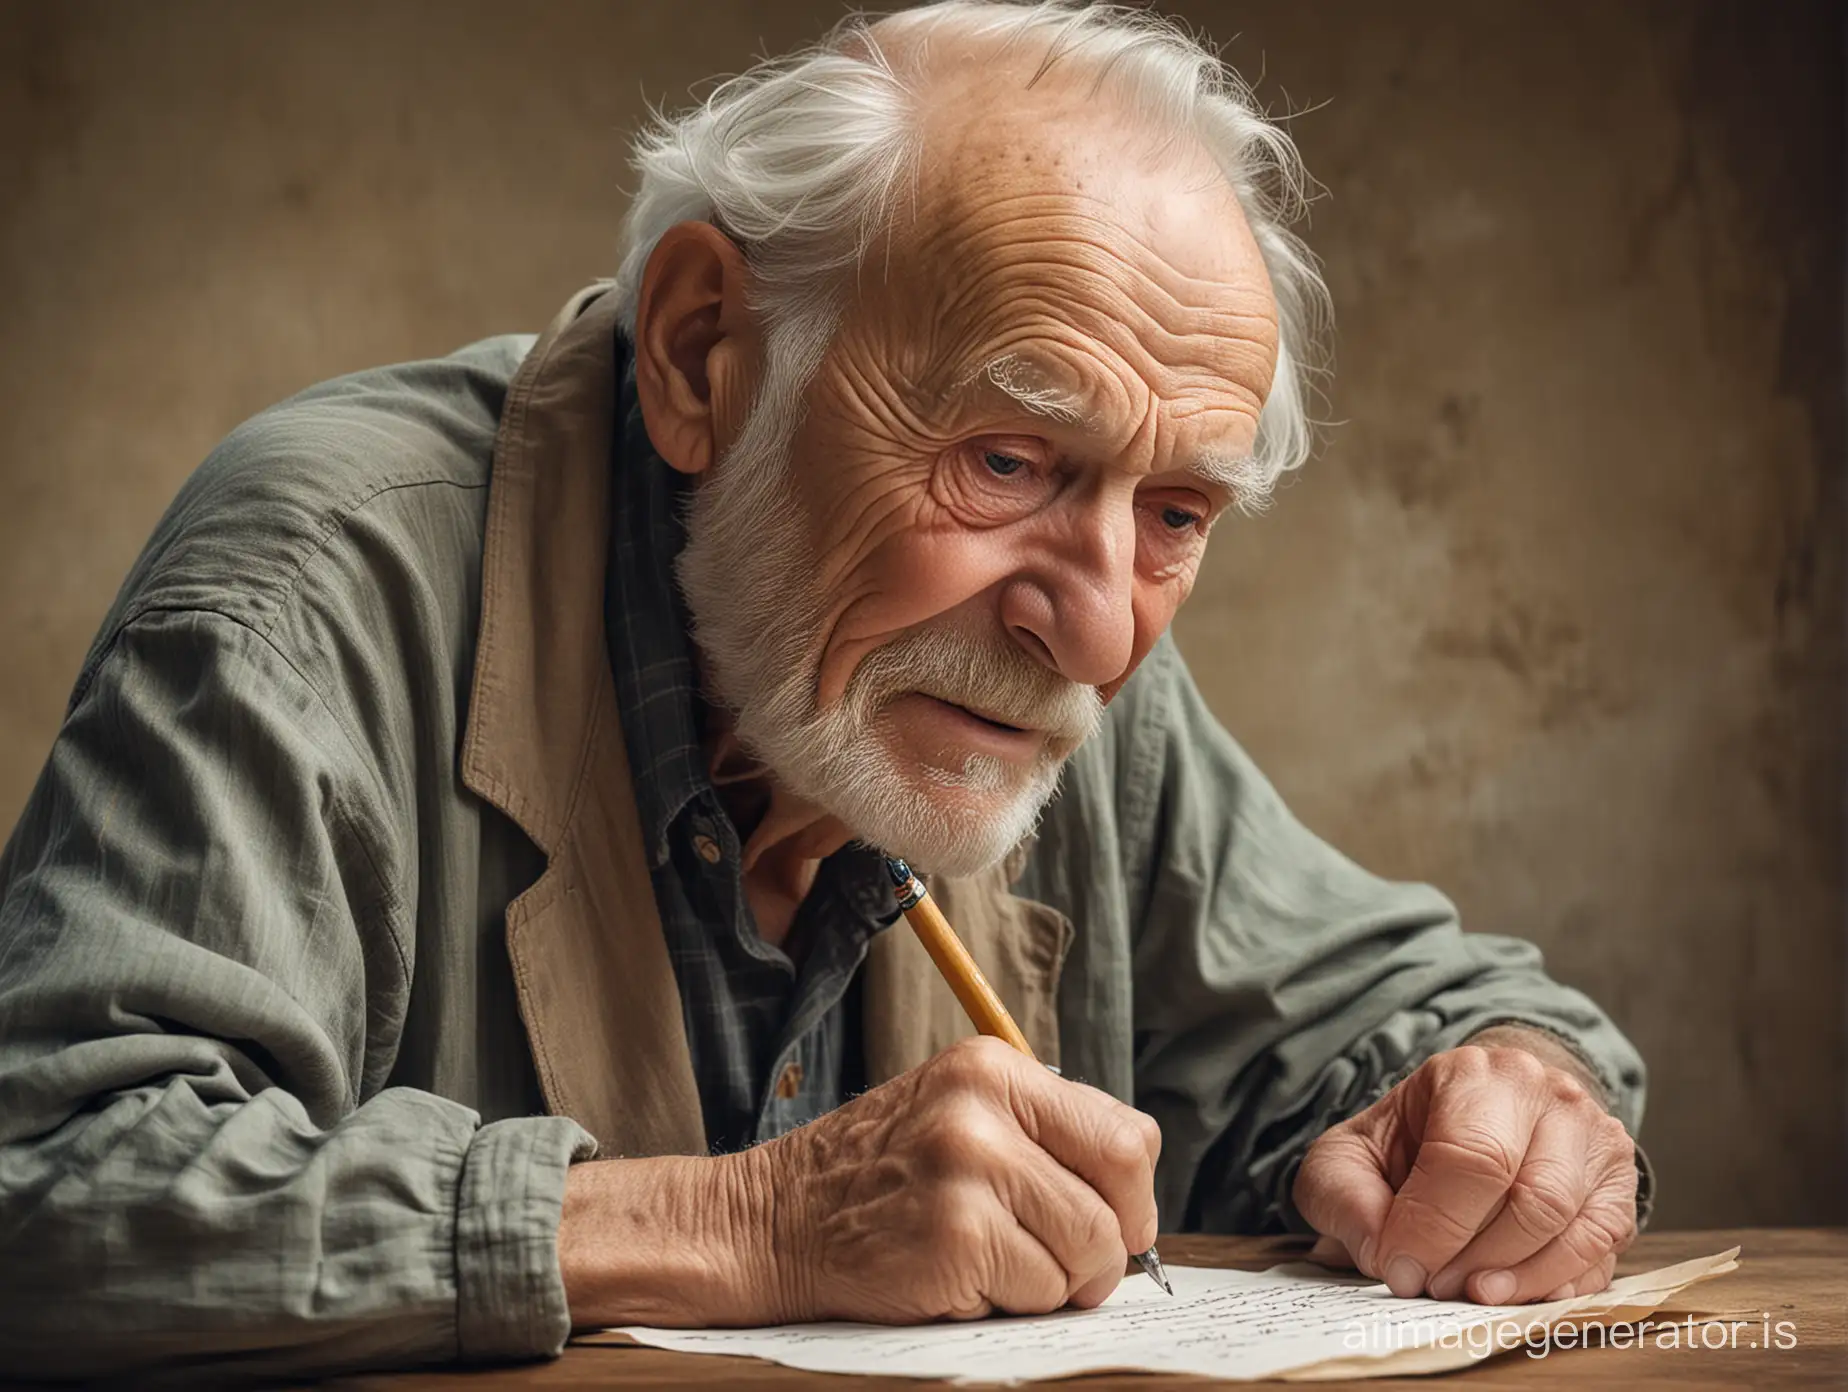 A detailed photo portrait of an old man with a wrinkled face sitting at a table and writing a letter with a dreamy, remembering face and a slight smile